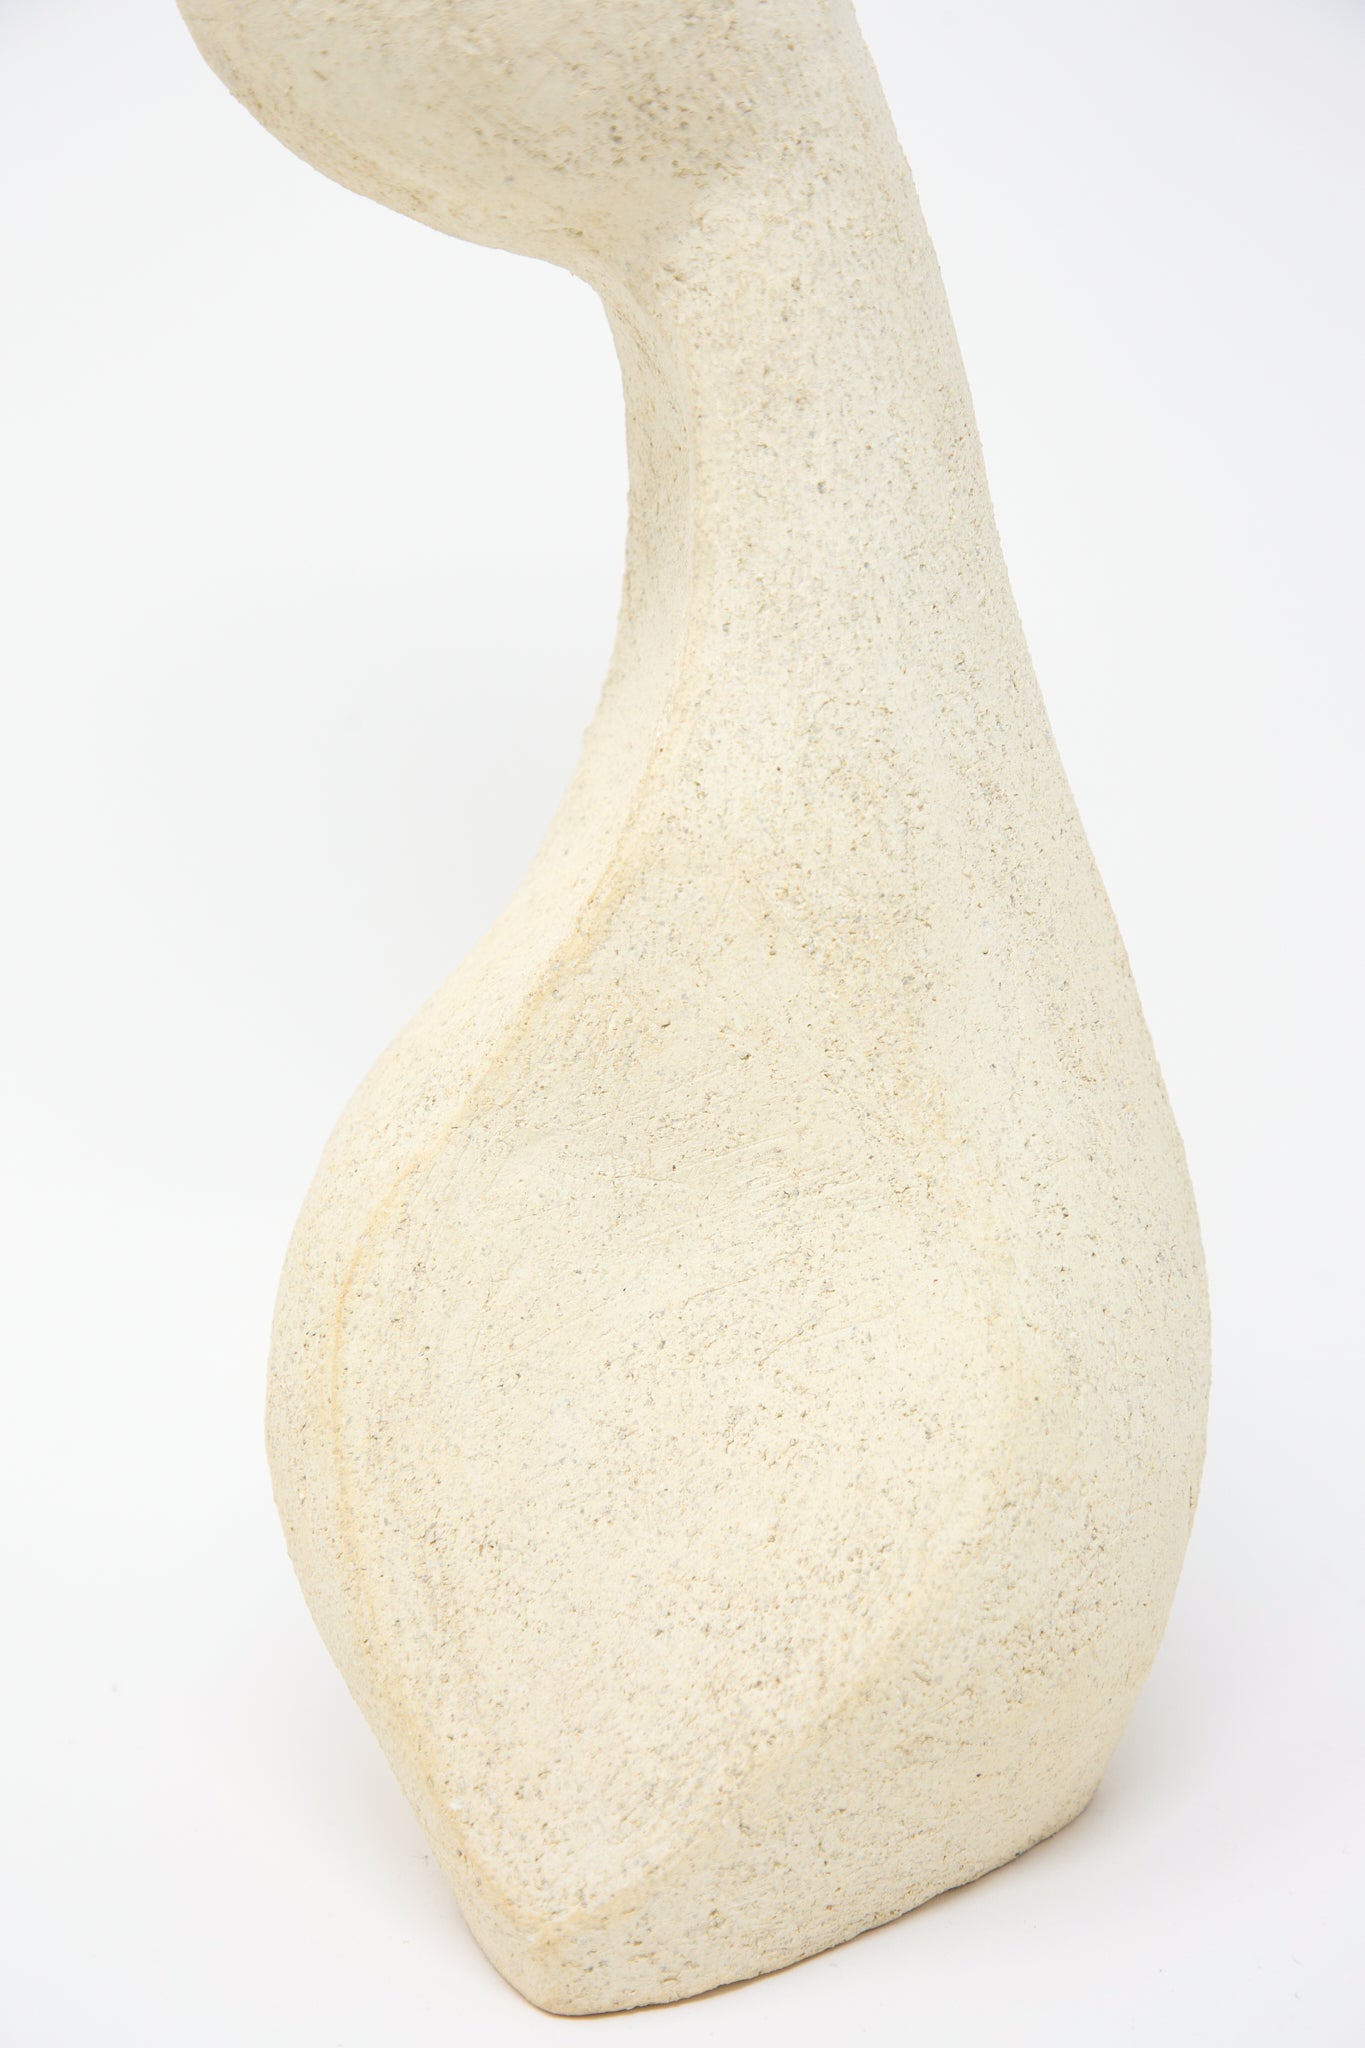 A Lost Quarry white sculpture on a white background, showcasing delicate floral arrangements, featuring the Medium Hand Built Vessel No. 000713 Bud Vase.